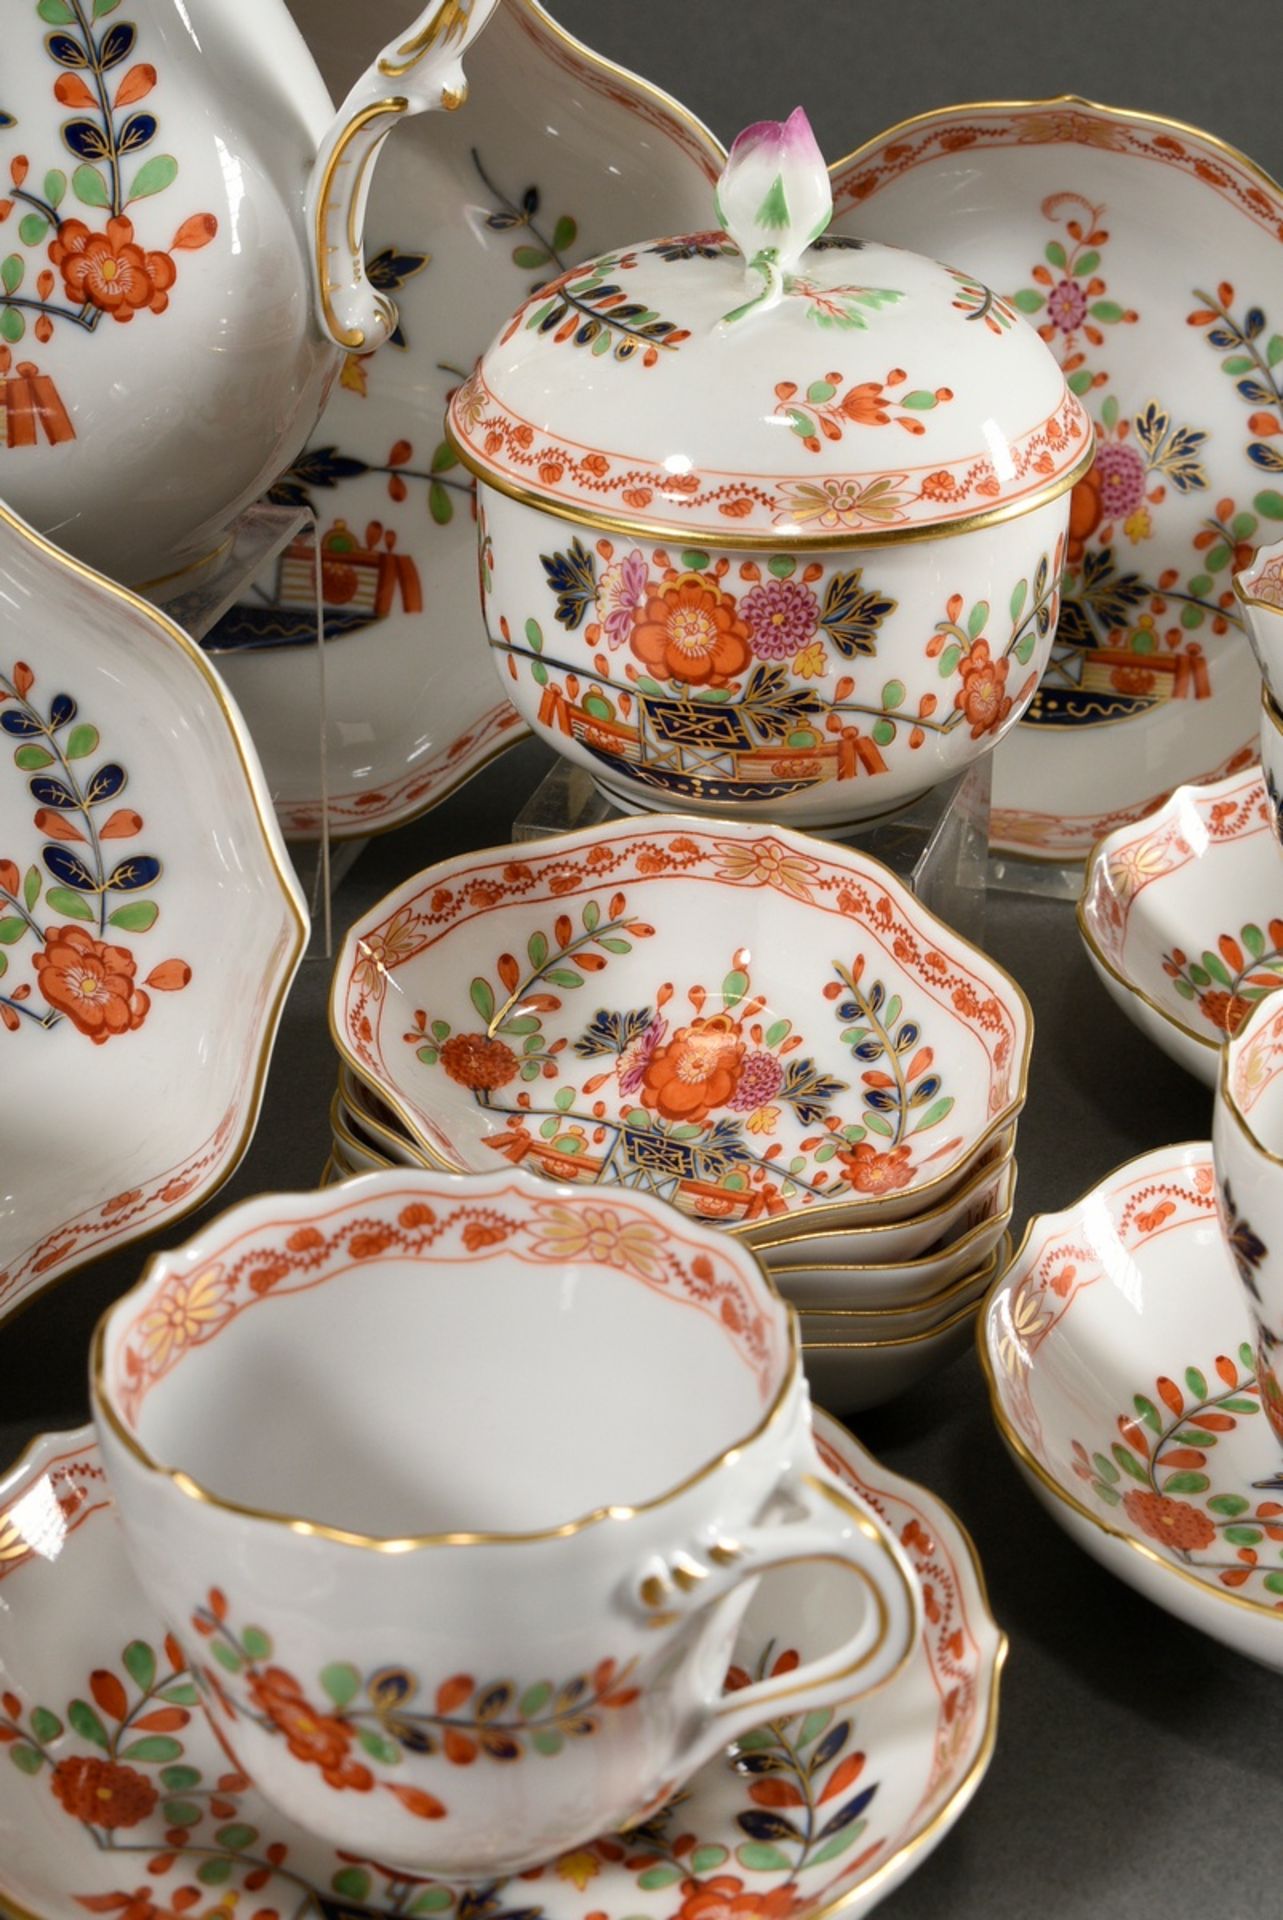 26 Pieces Meissen mocha service "Tischchenmuster" with gold staffage for 10 people, 20th c., consis - Image 3 of 6